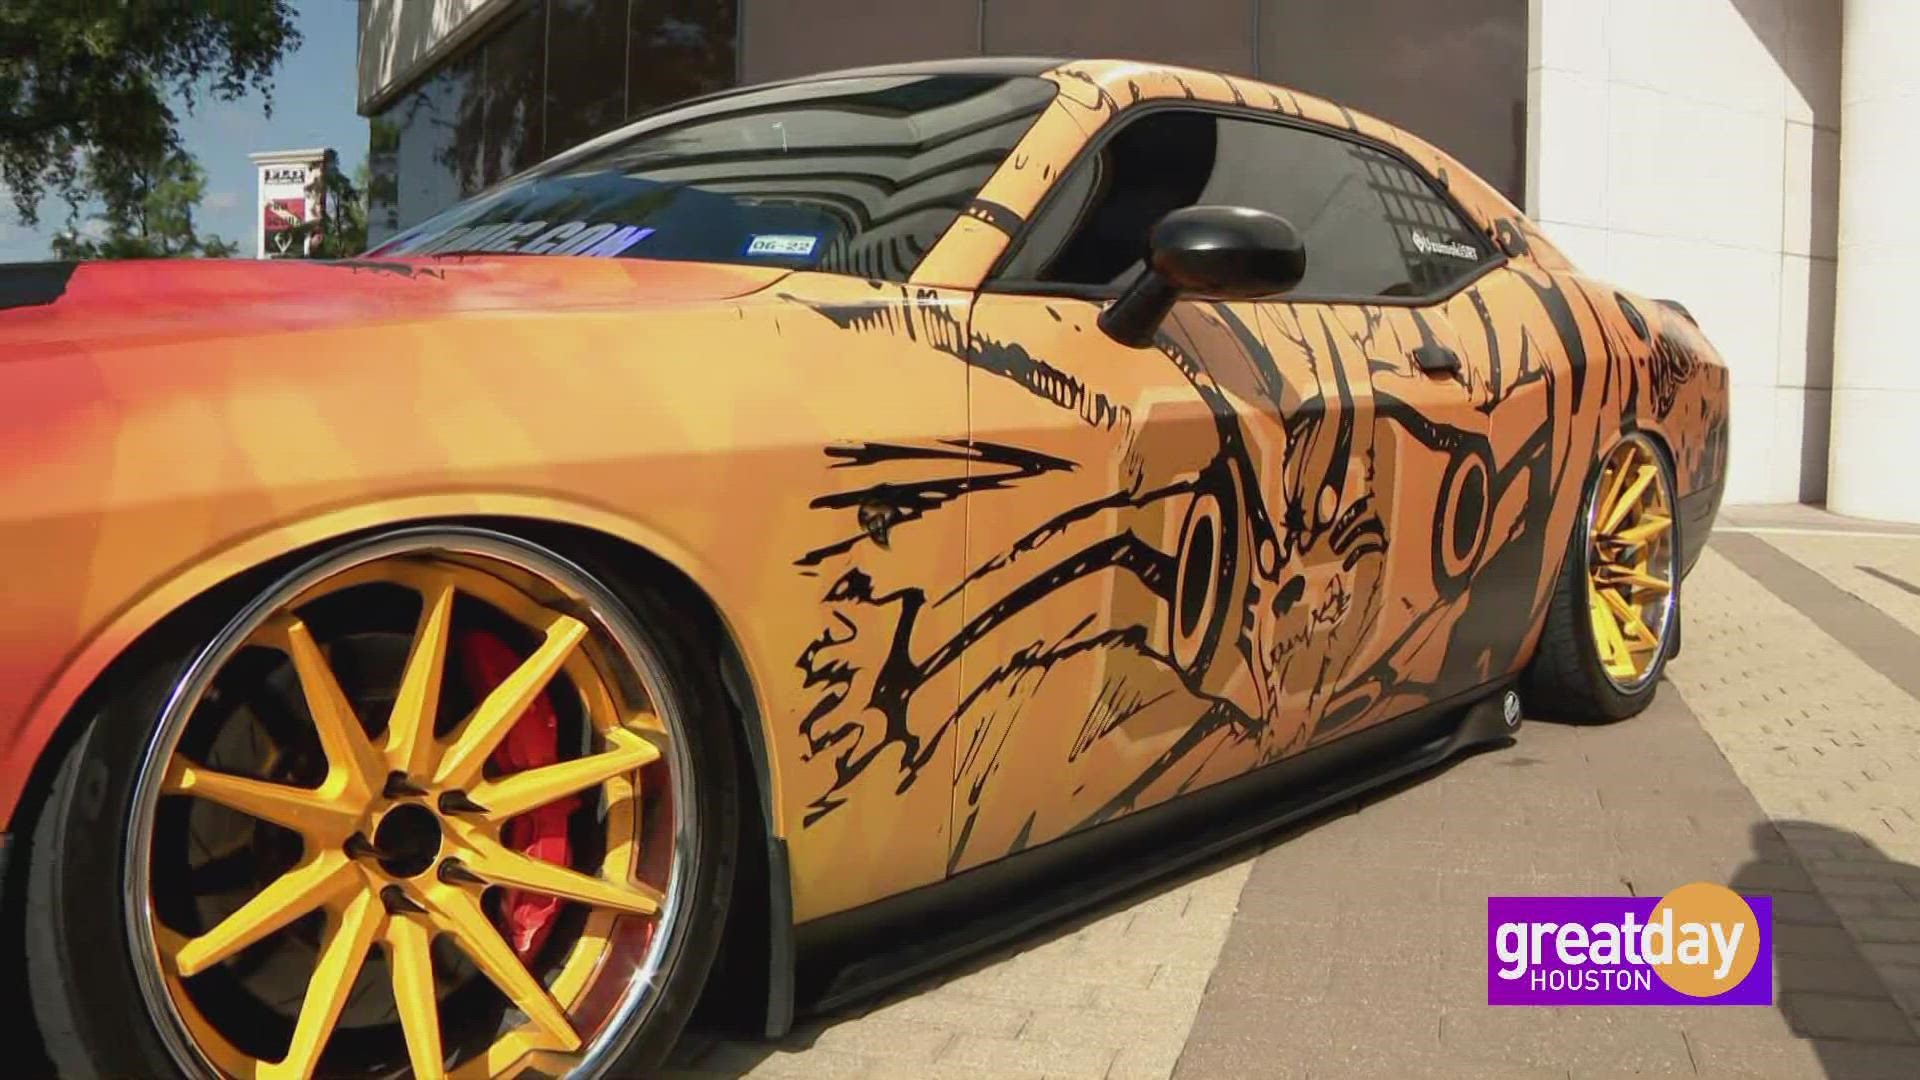 Themed car culture devotee, Koriey Dixon, explains what Itasha means and how it's grown in America